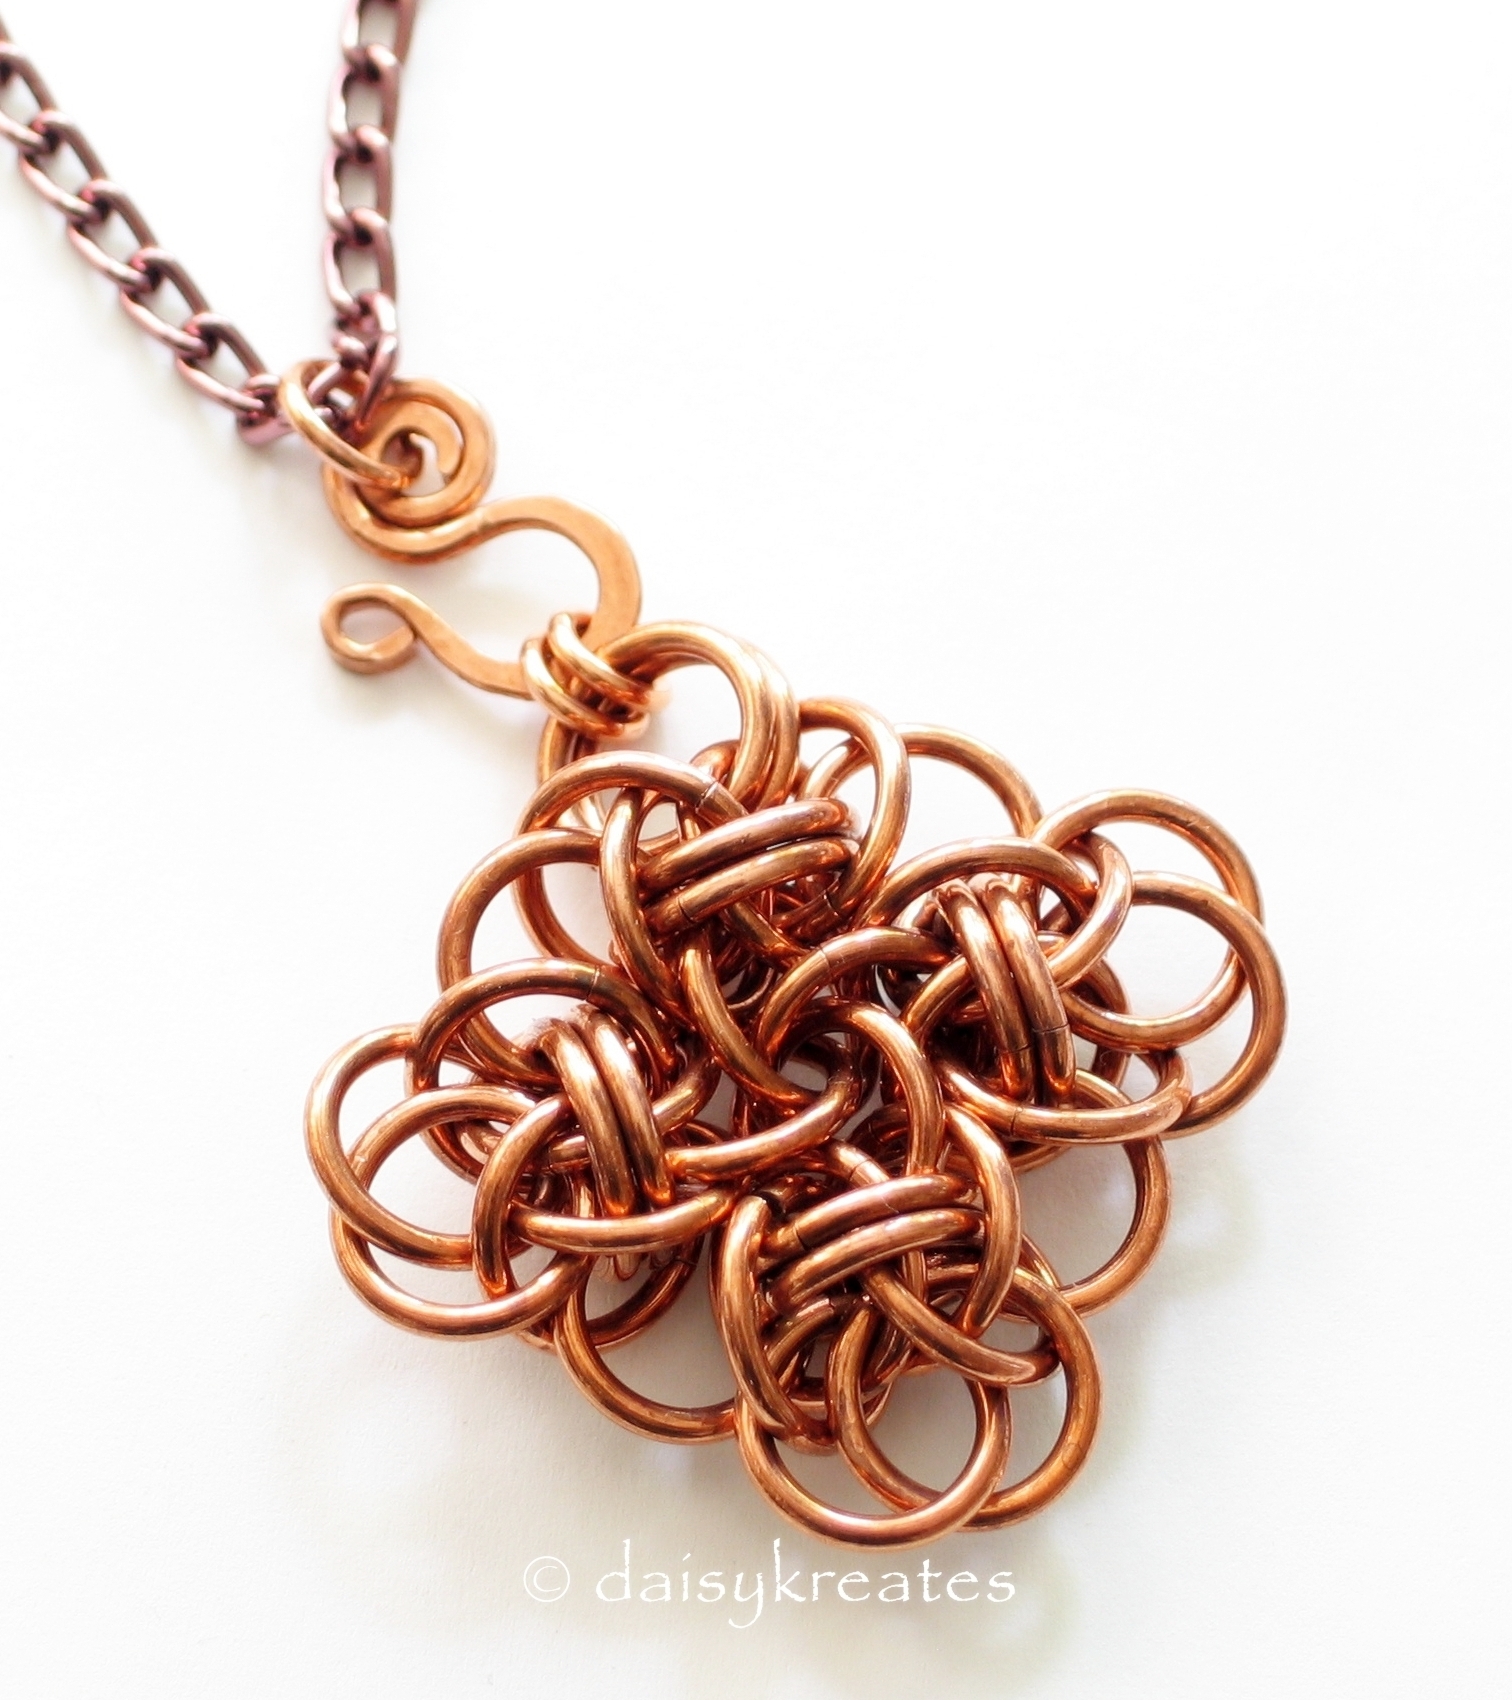 Copper Chainmail Persephone Square Knot Pendant Adjustable Necklace